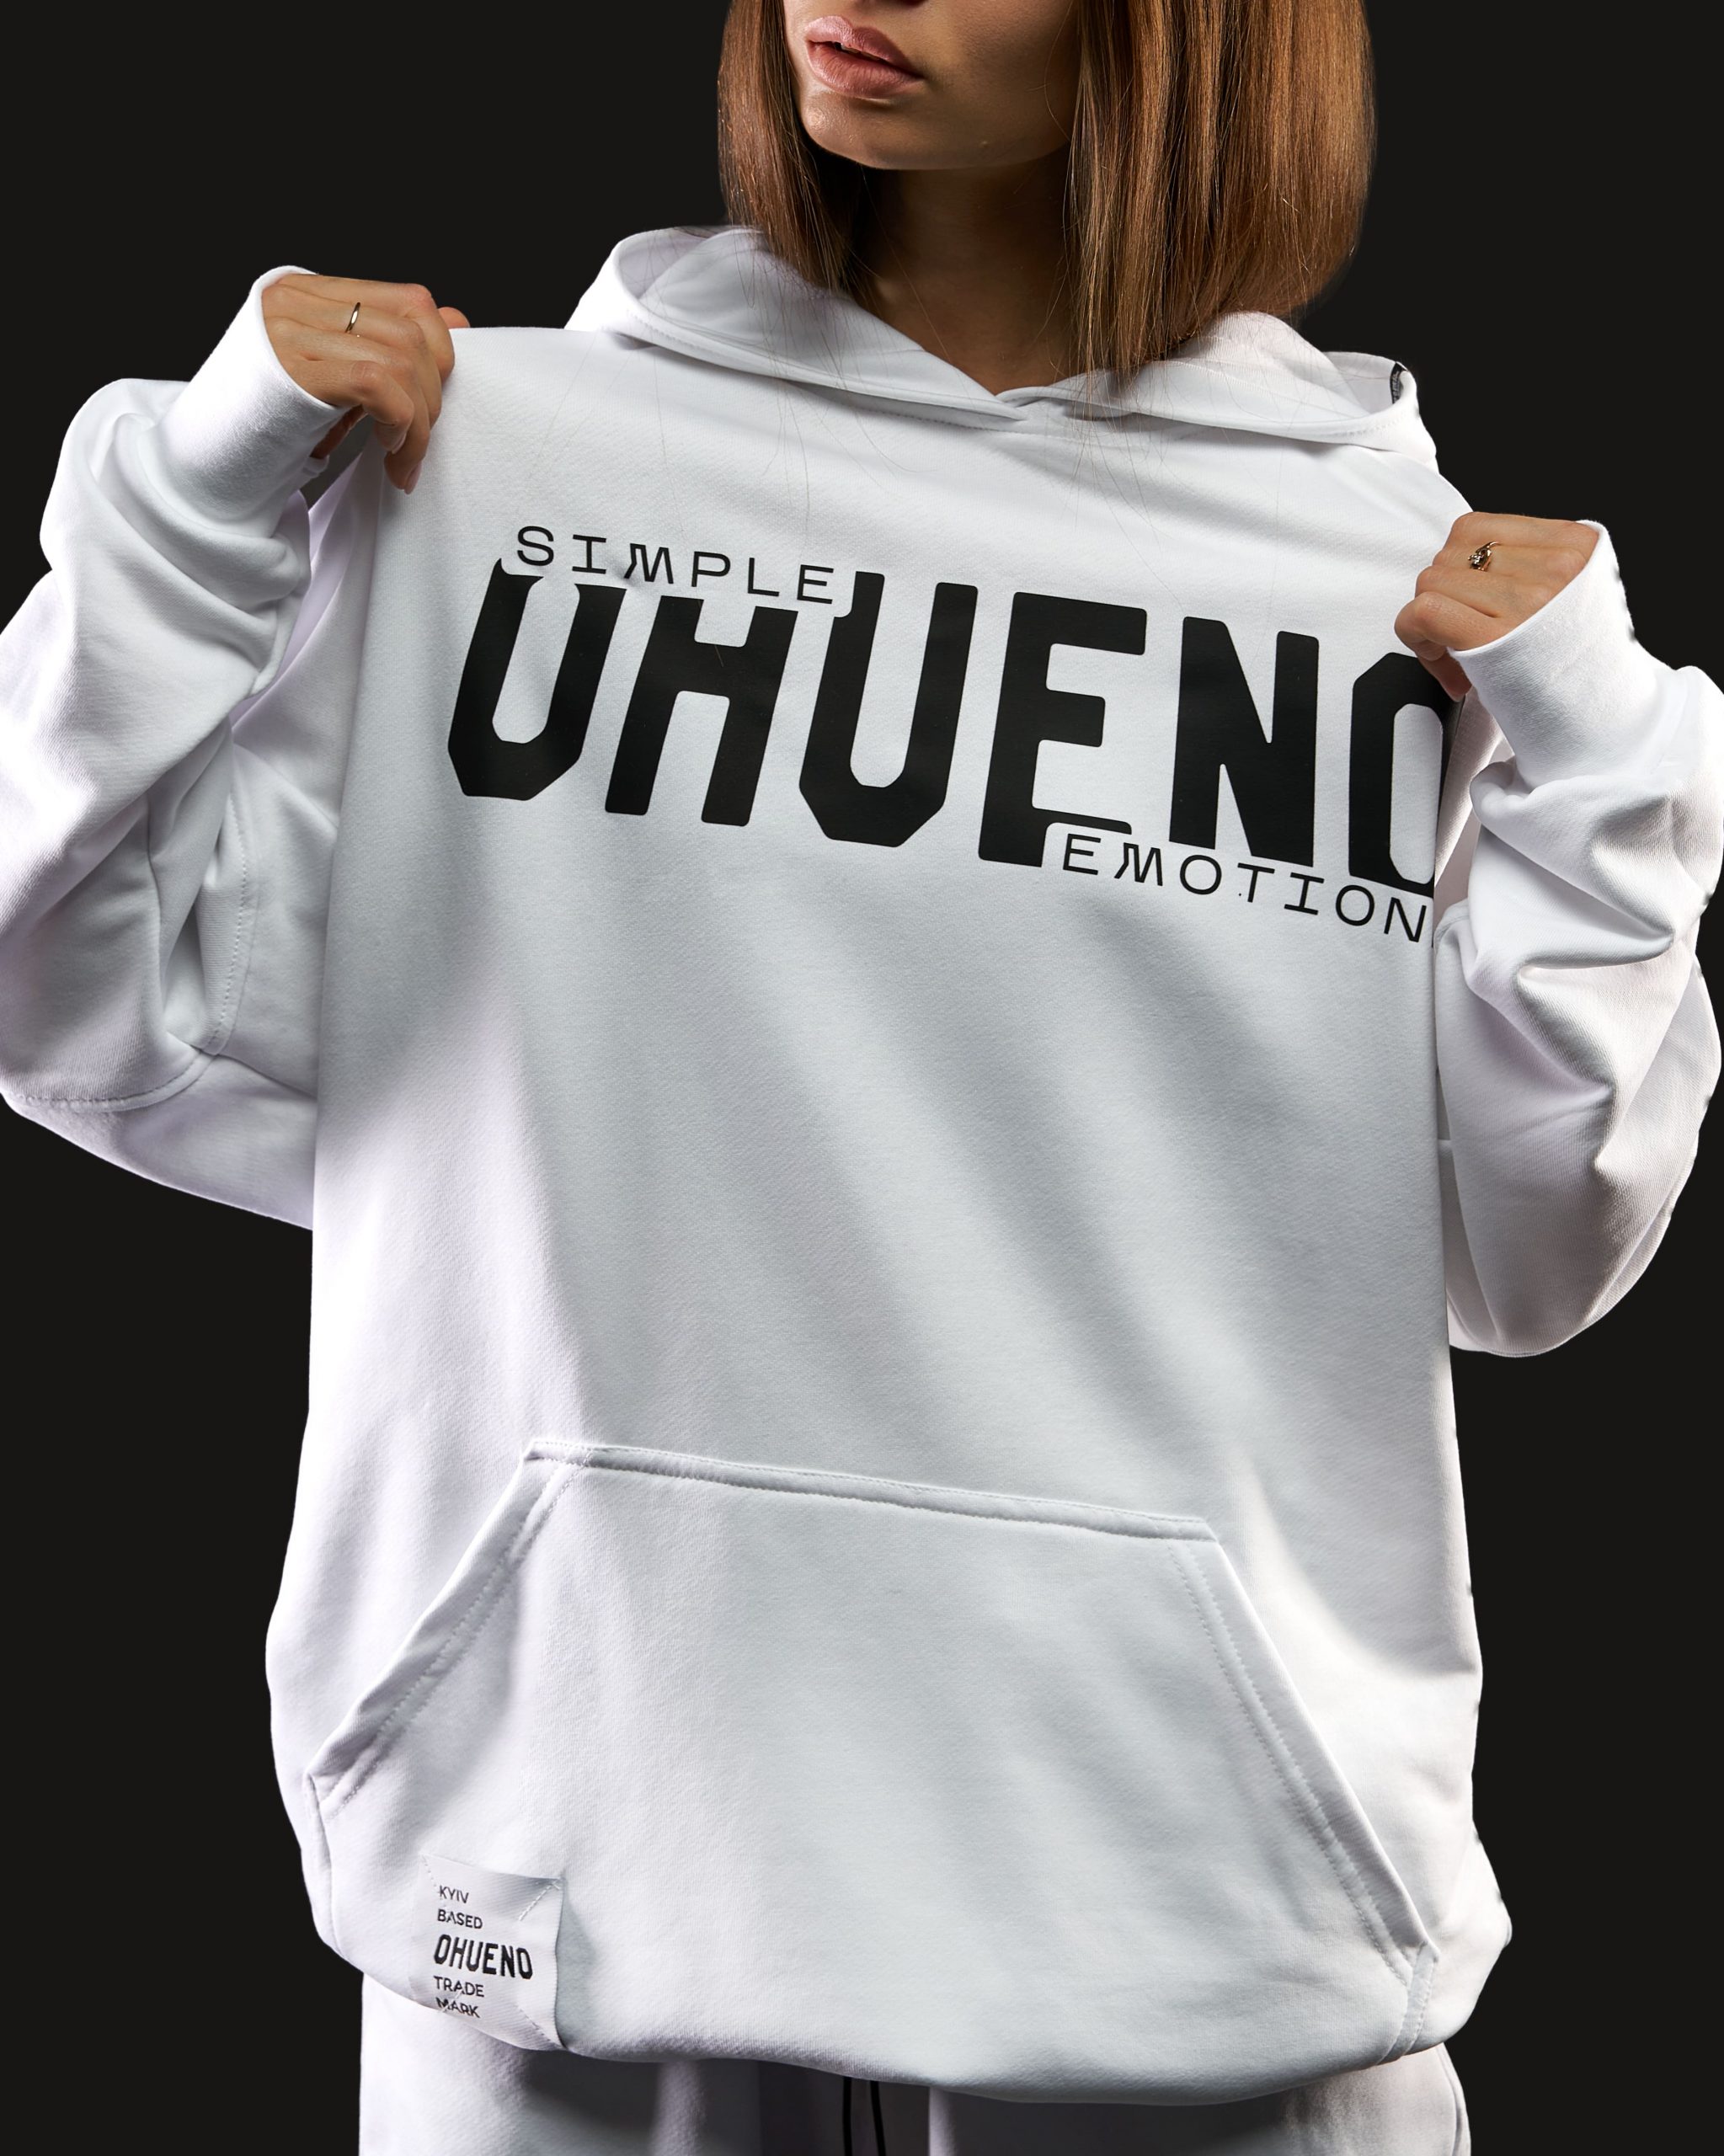 Oversized hoodie (white) Image: https://ohueno-official.com/wp-content/uploads/m00393-scaled.jpg